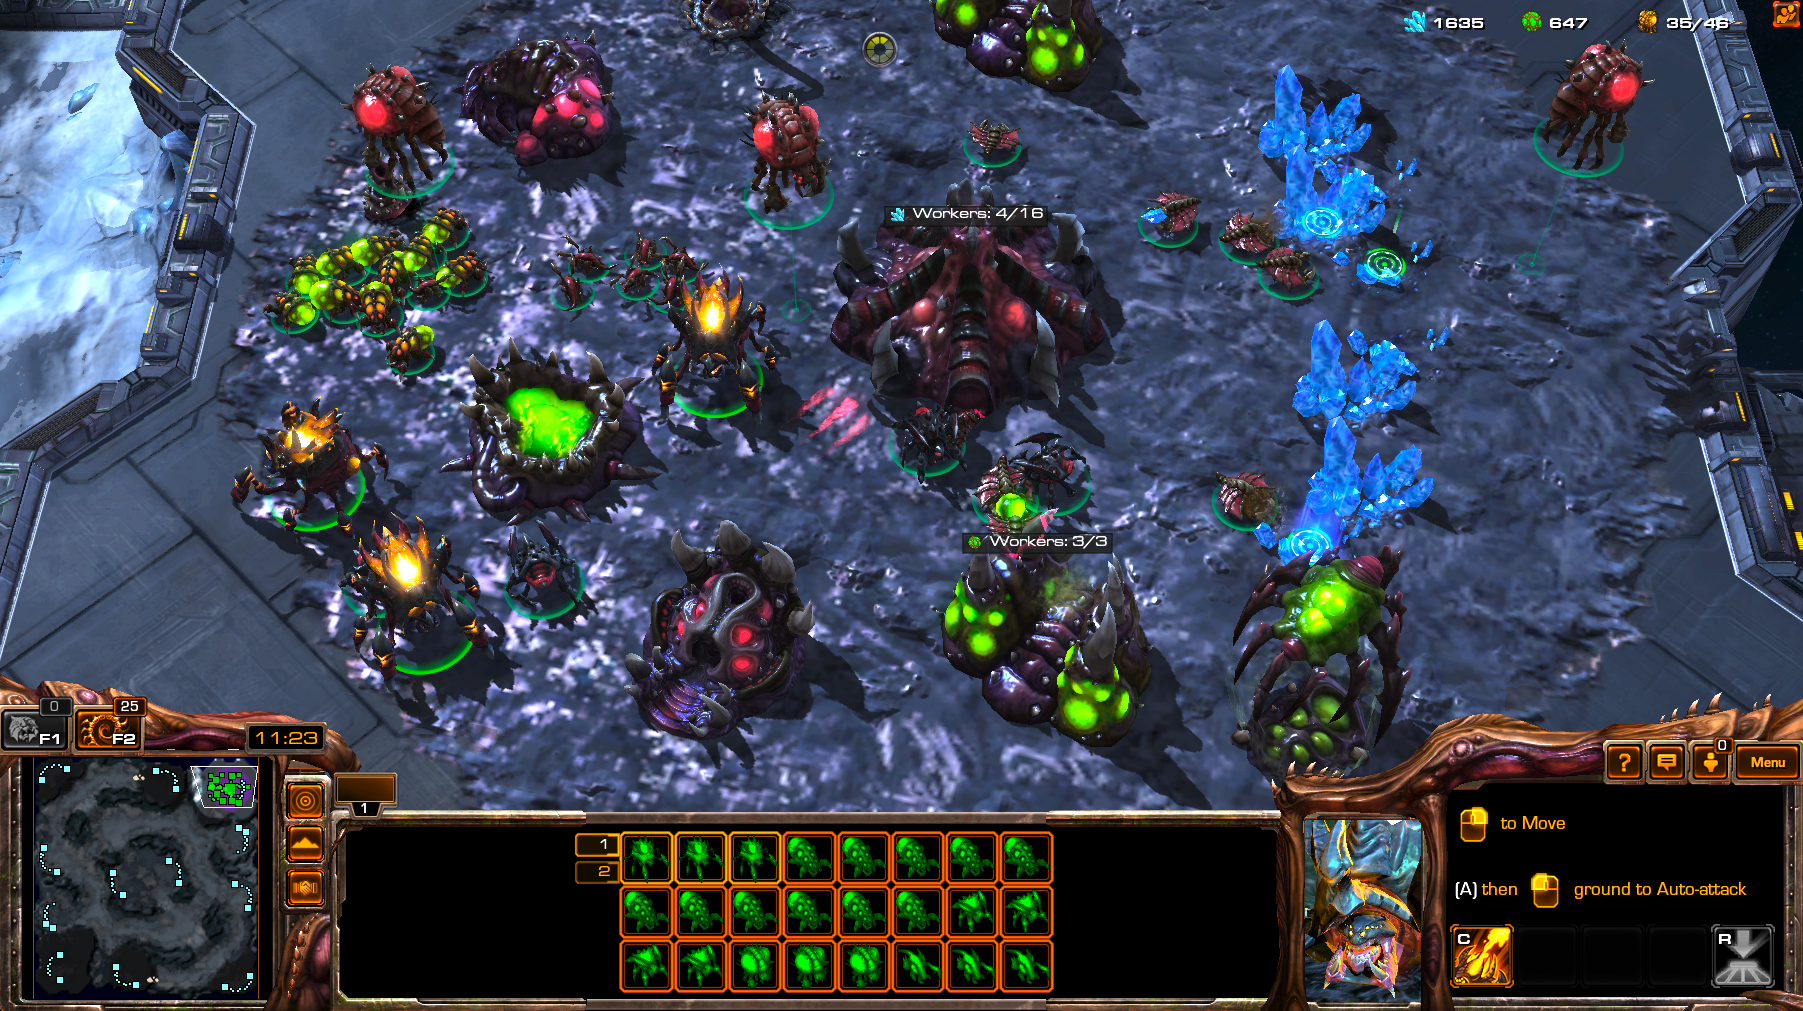 how to download starcraft 2 on pc